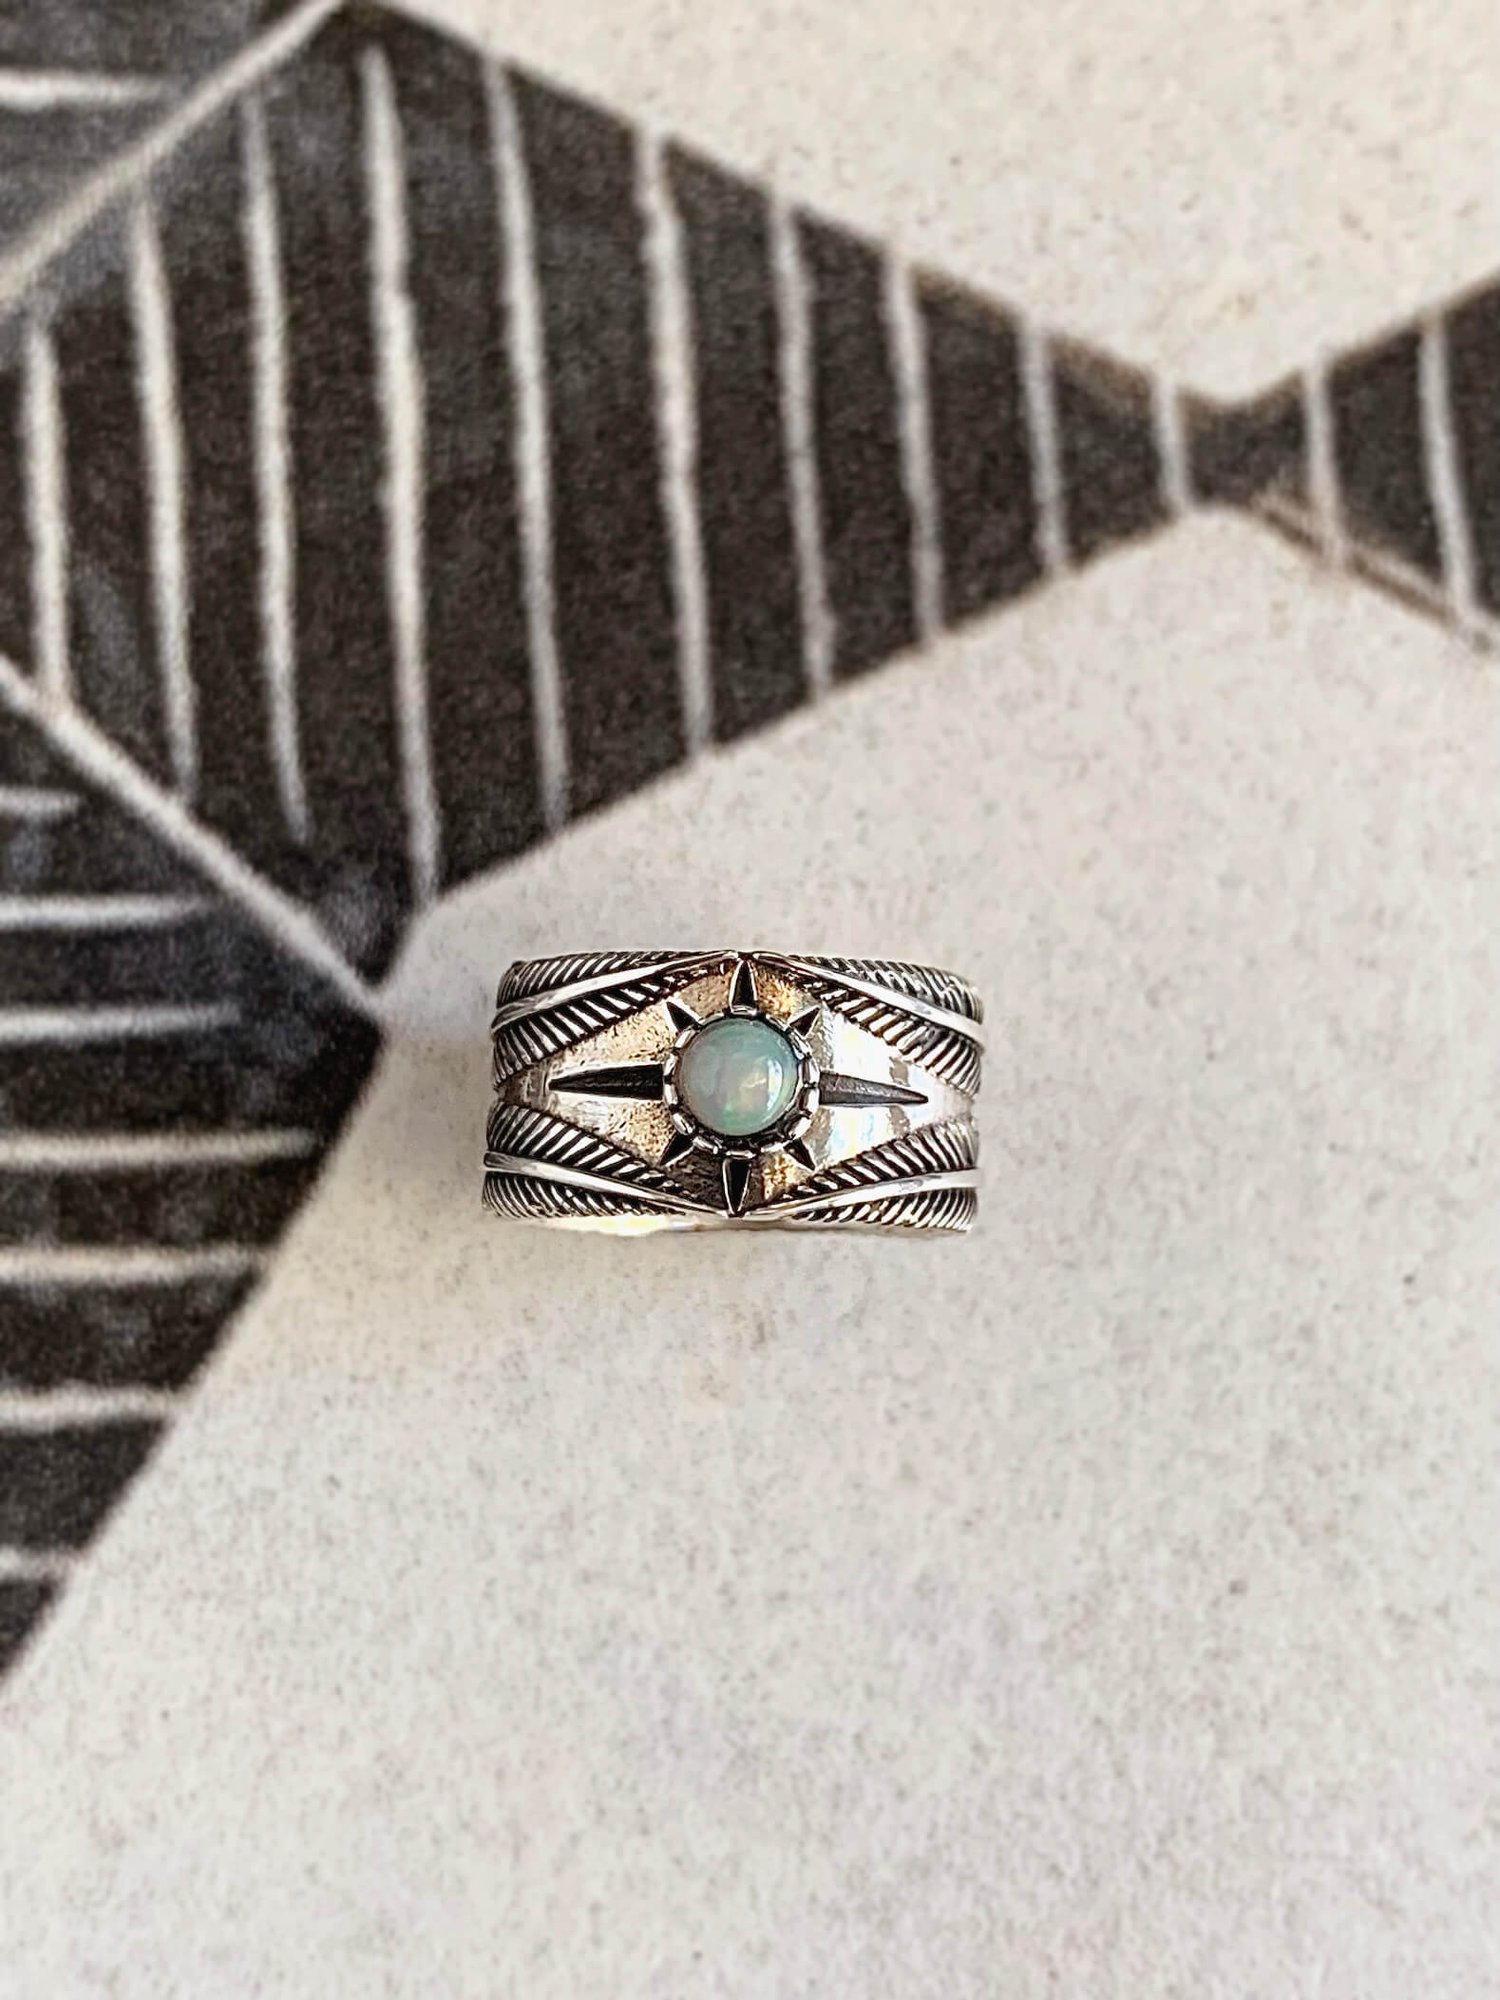 Night Queen Opal Silver Ring | Ooh! Aah! Jewelry | New Mexico Jewelry Store  | Albuquerque | Nob Hill — Albuquerque | Jewelry | Rings | Ooh! Aah! Jewelry